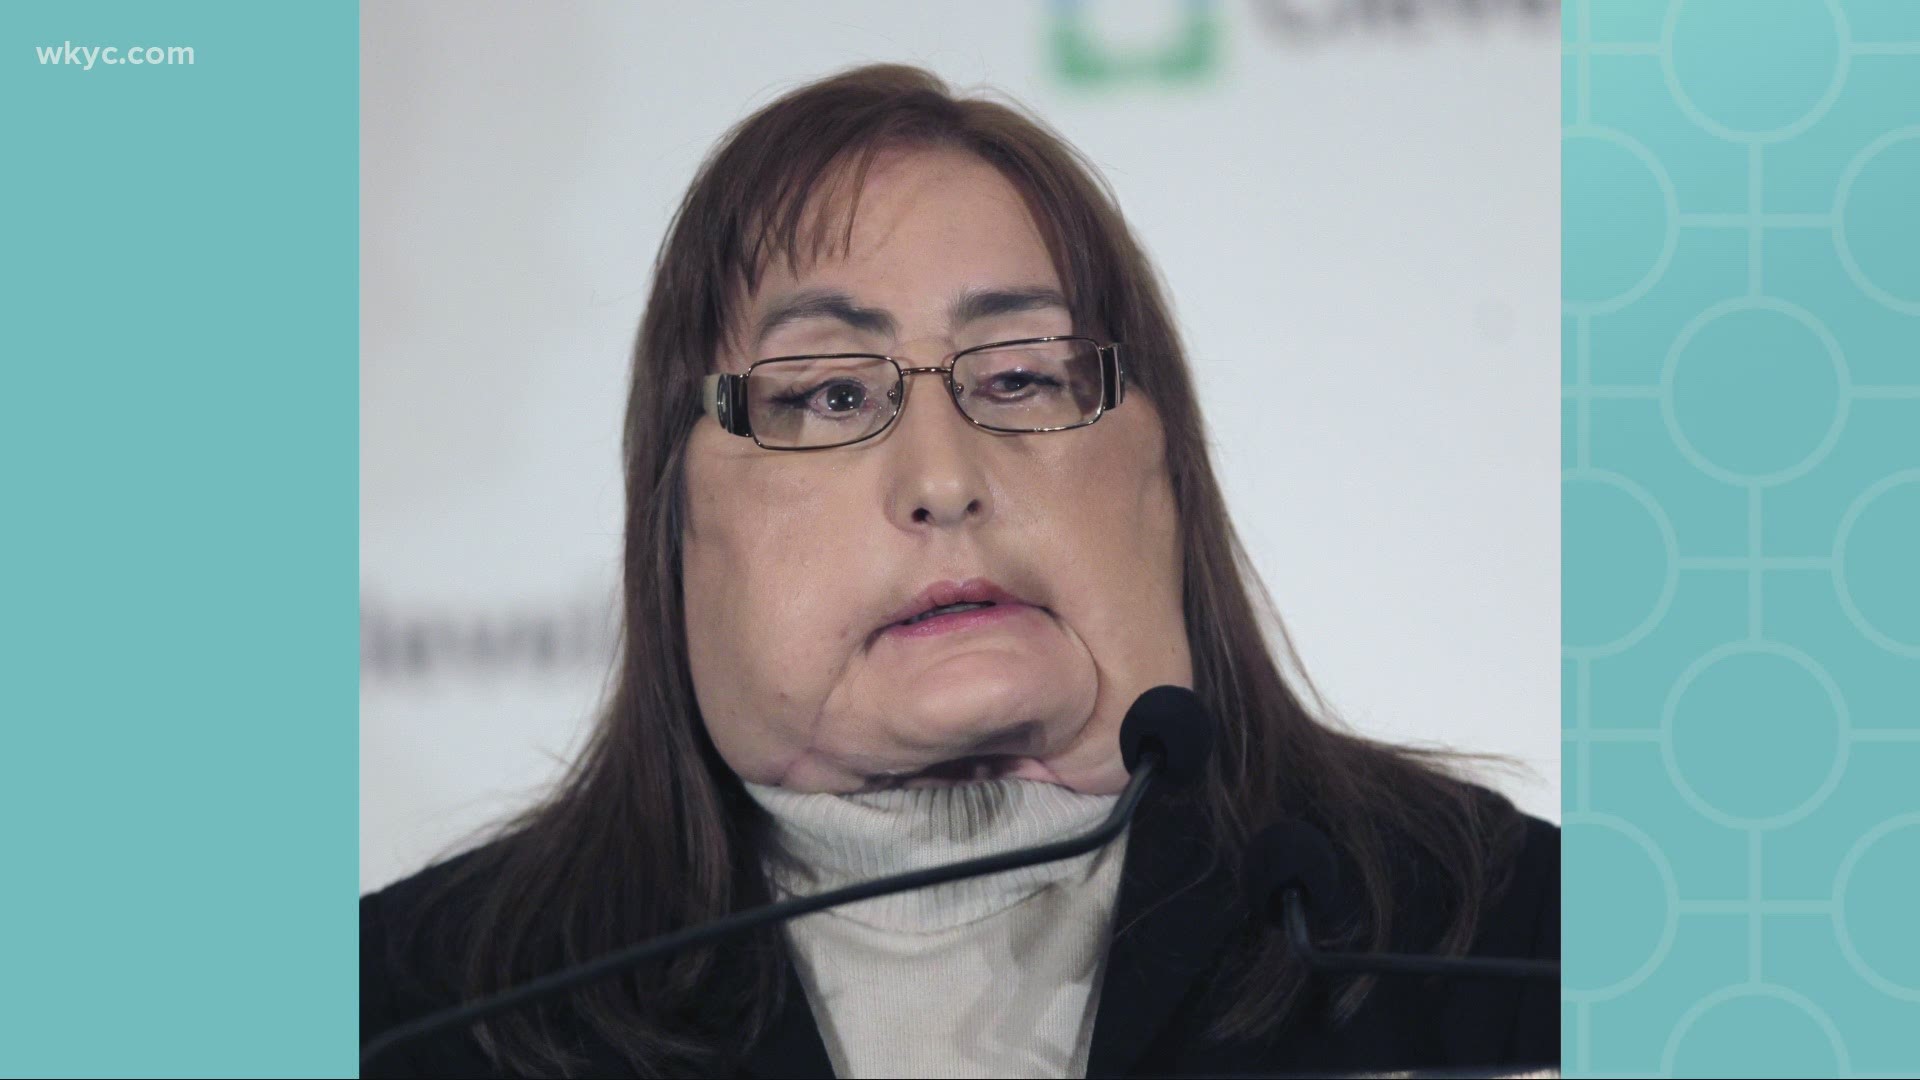 Culp was the first near-total face transplant recipient in the US. The procedure was performed at the clinic back in 2008, after her husband shot her.